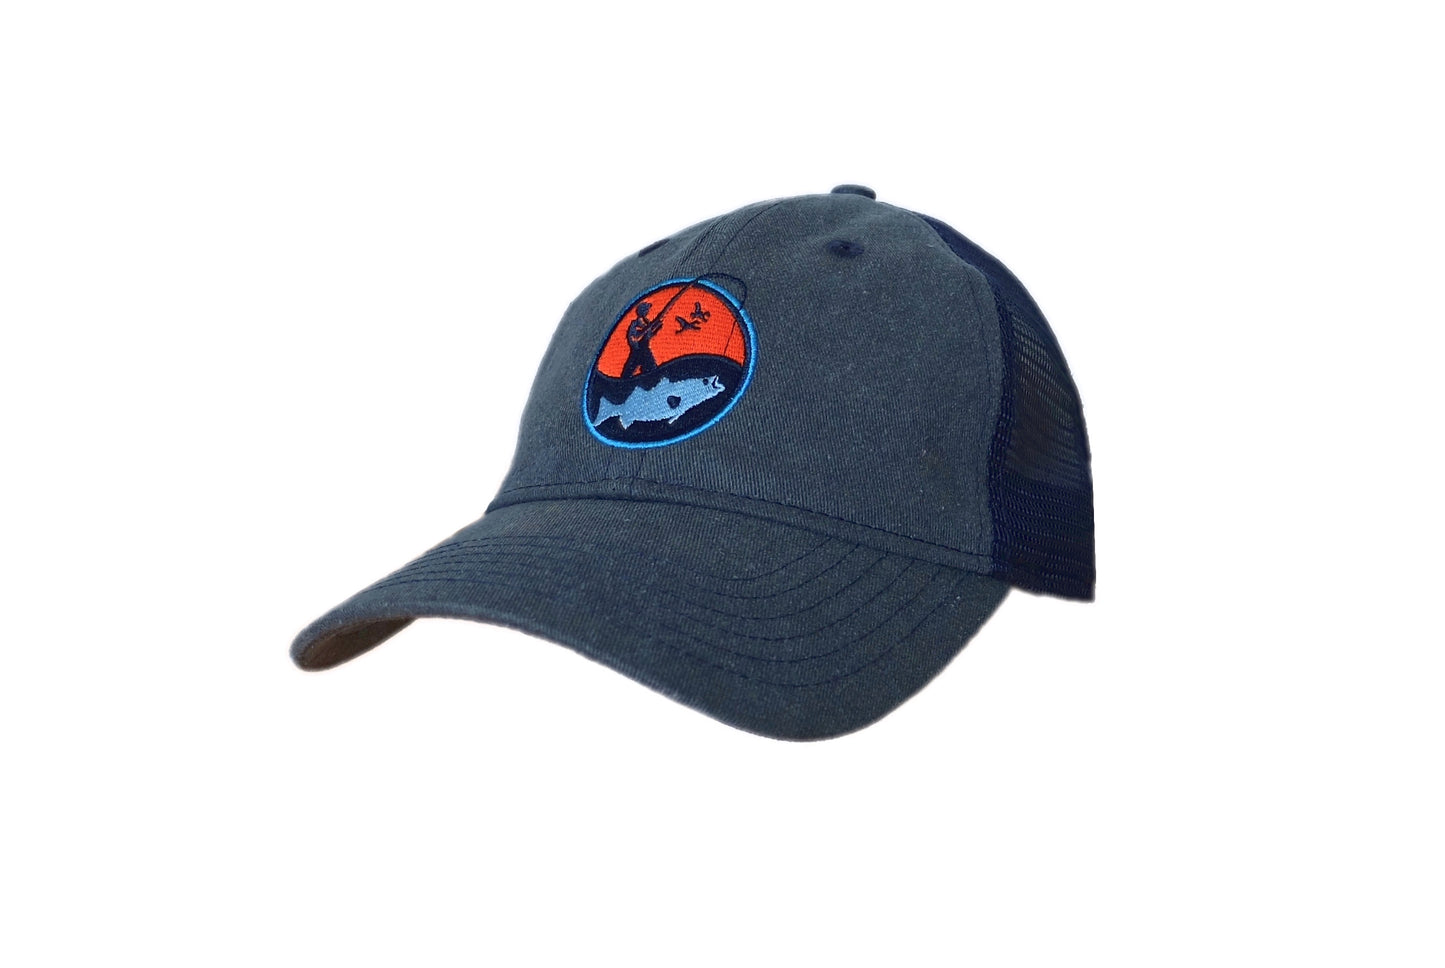 Dark grey and navy unstructured trucker cap with round orange and blue embroidered fisherman logo